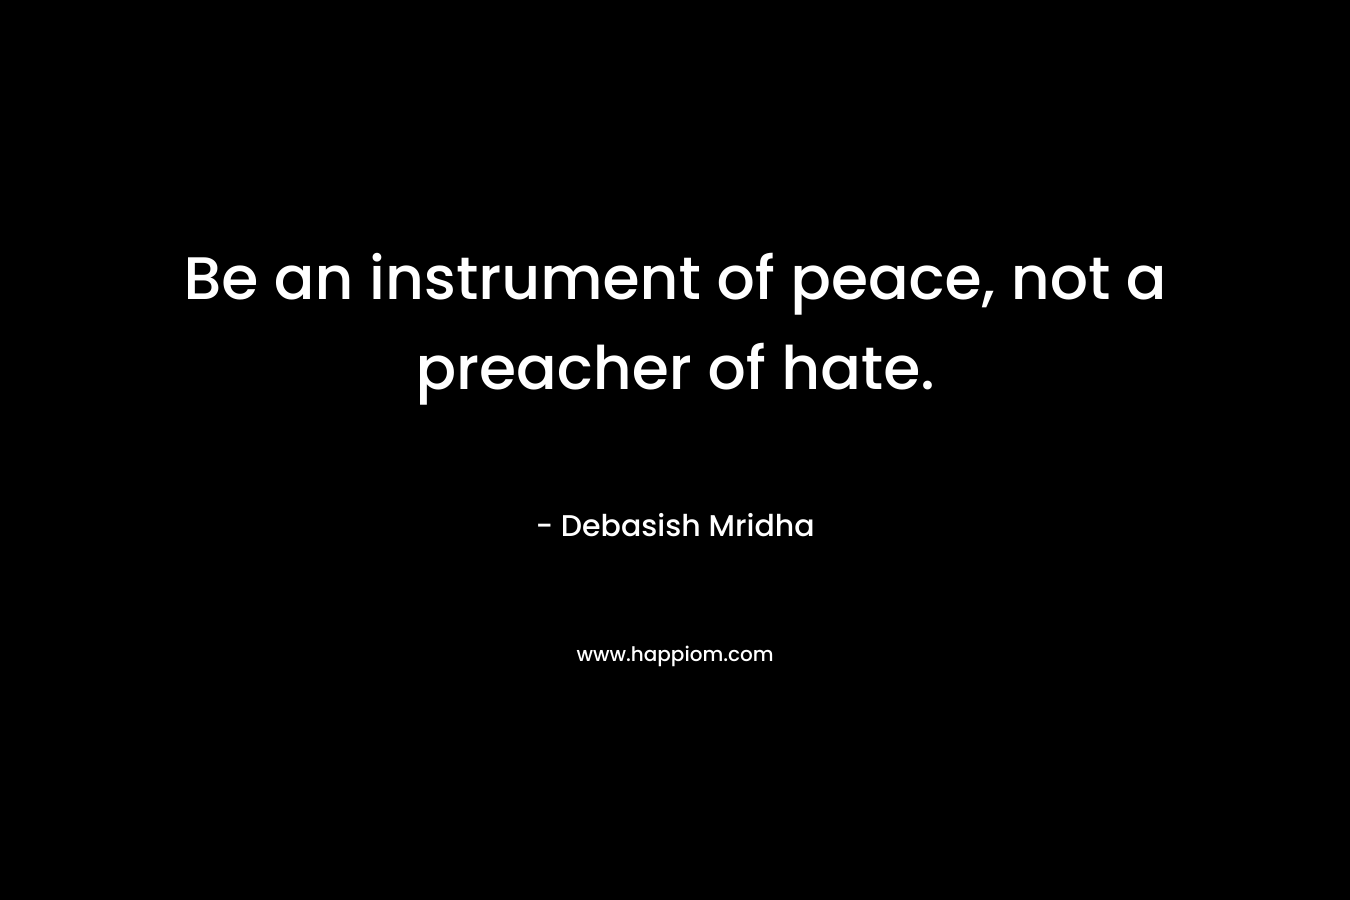 Be an instrument of peace, not a preacher of hate. – Debasish Mridha